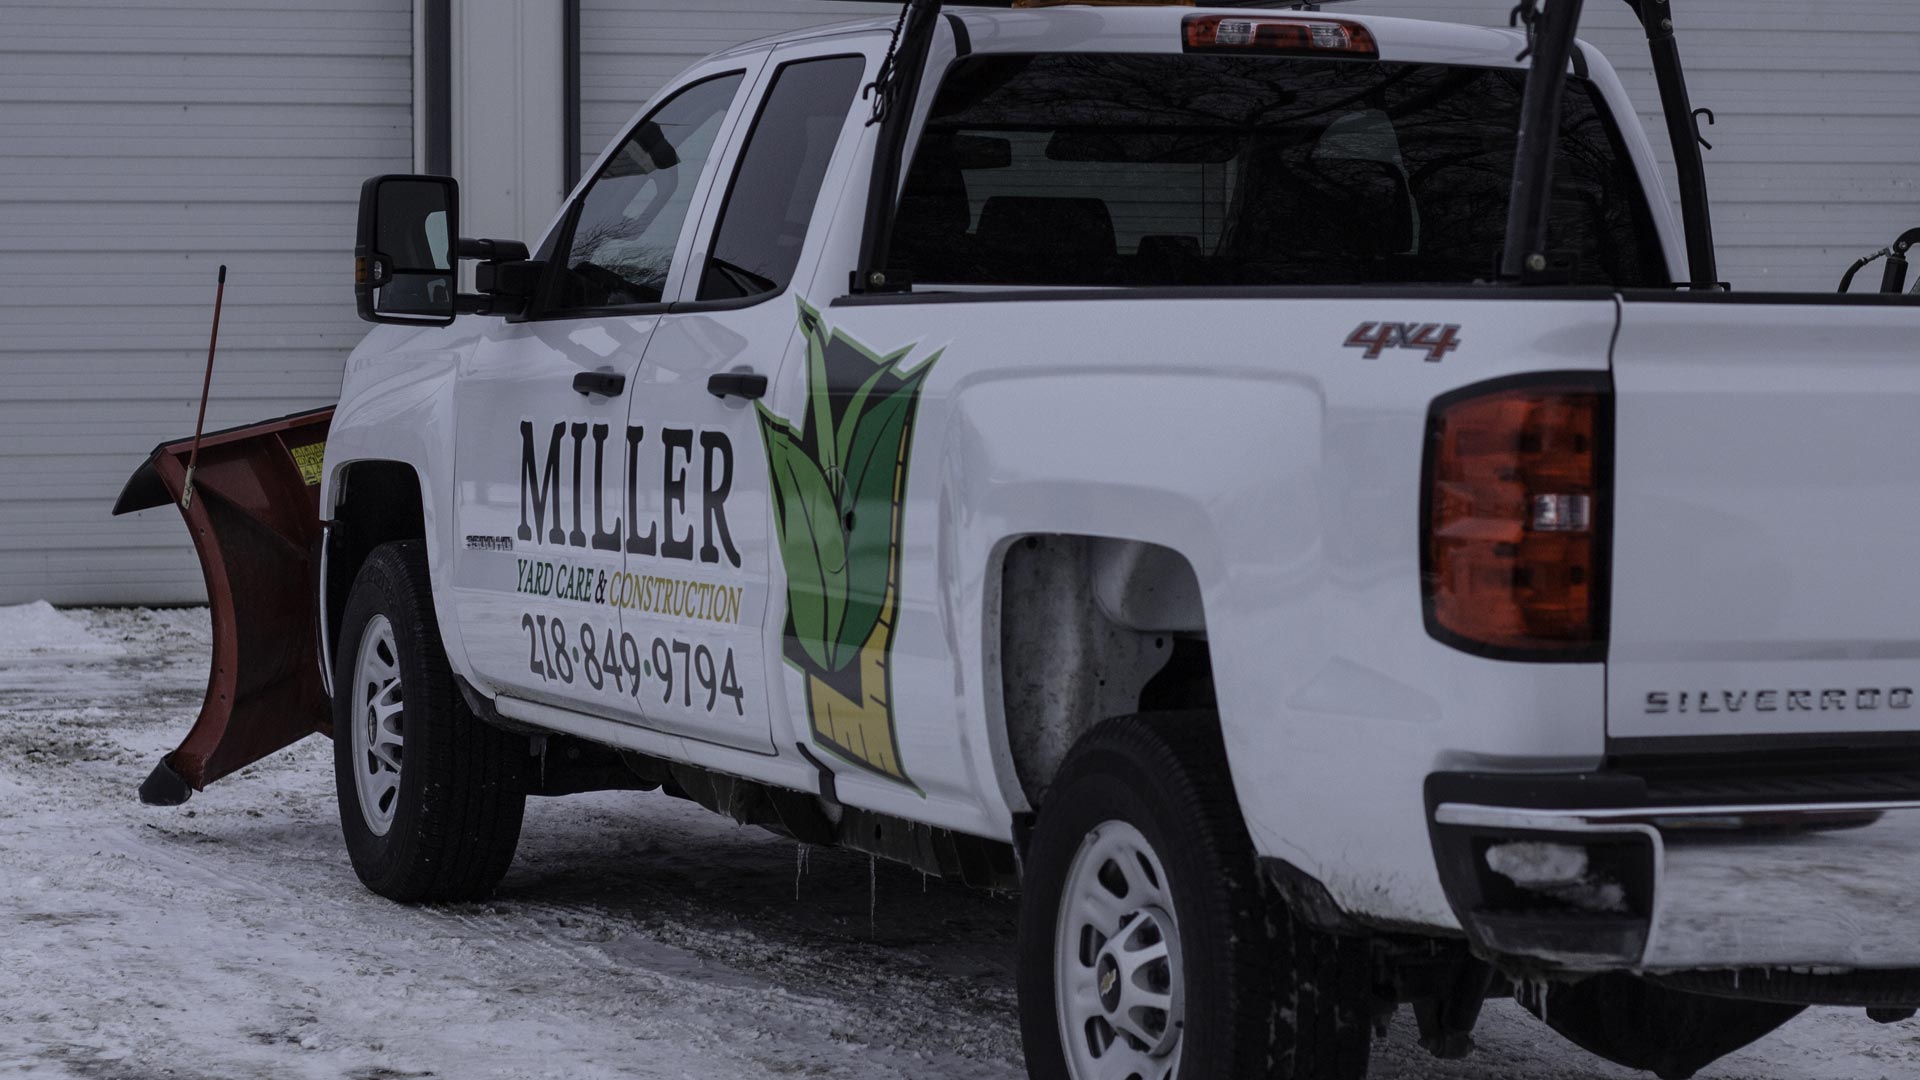 Miller Yard Care & Construction company truck with a snow plow on the front in preparation for snow removal services.